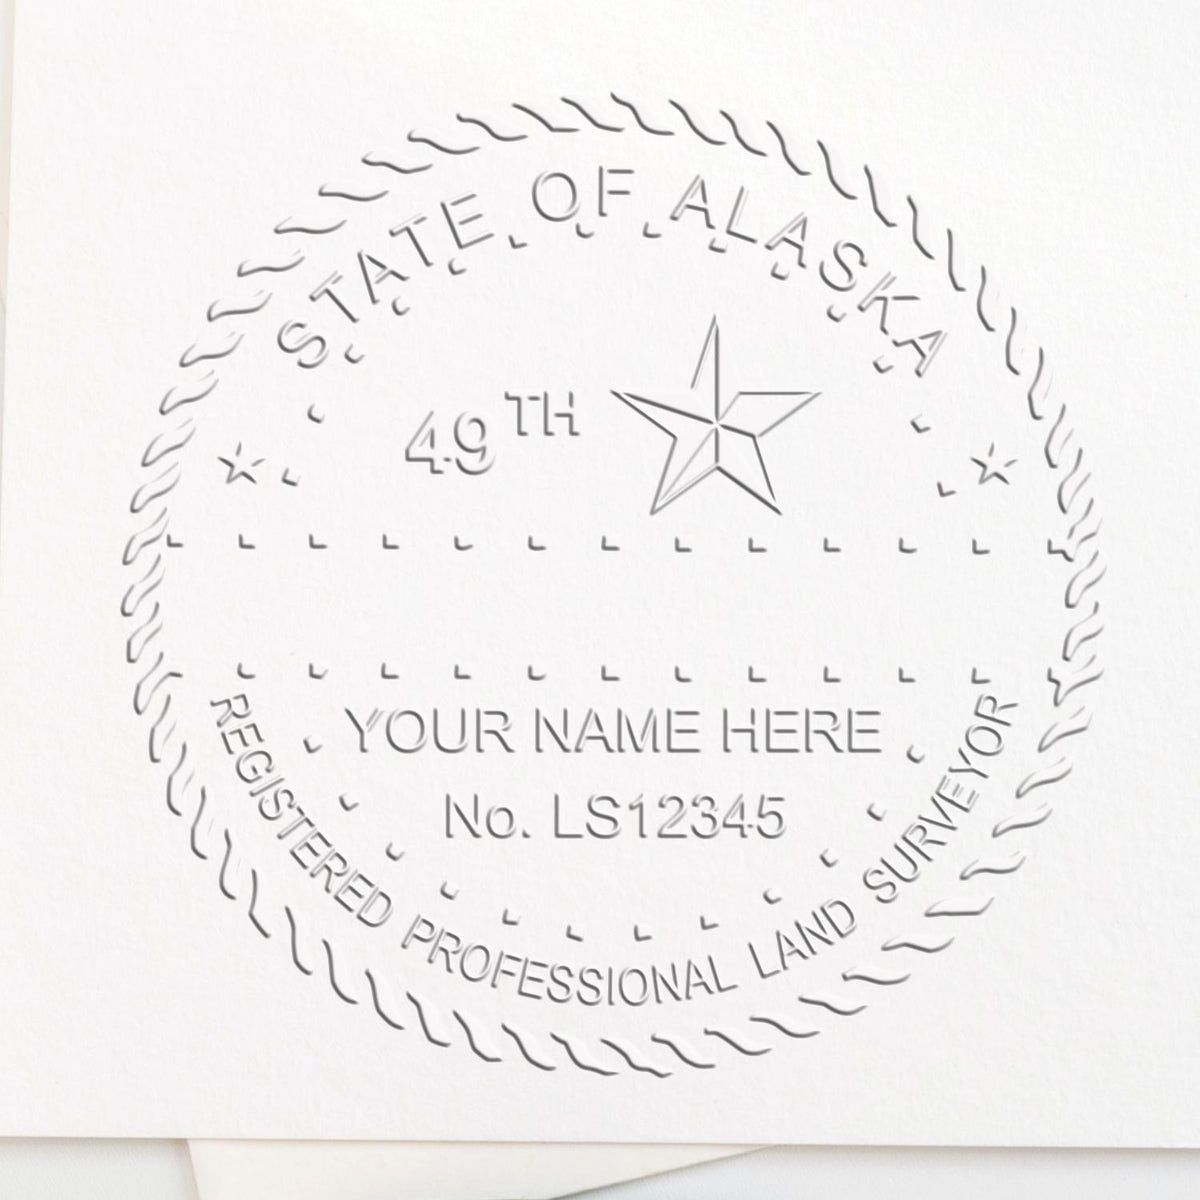 A stamped imprint of the Gift Alaska Land Surveyor Seal in this stylish lifestyle photo, setting the tone for a unique and personalized product.